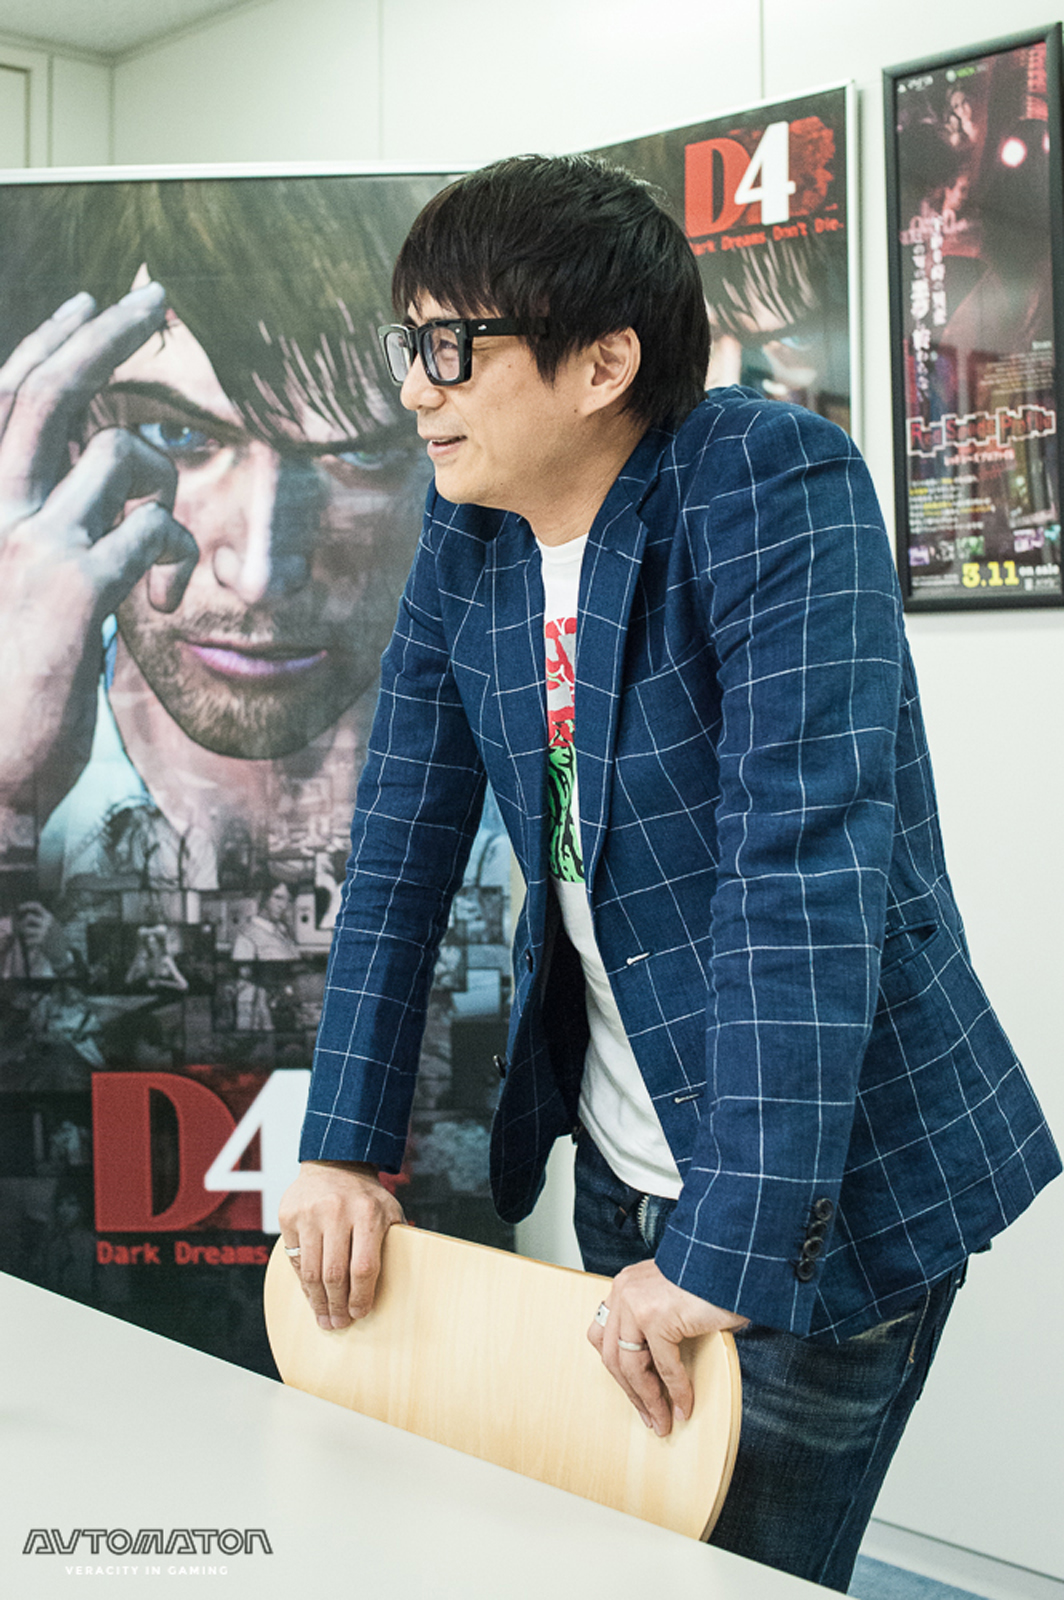 ask-swery-about-pc-d4-release-02-012